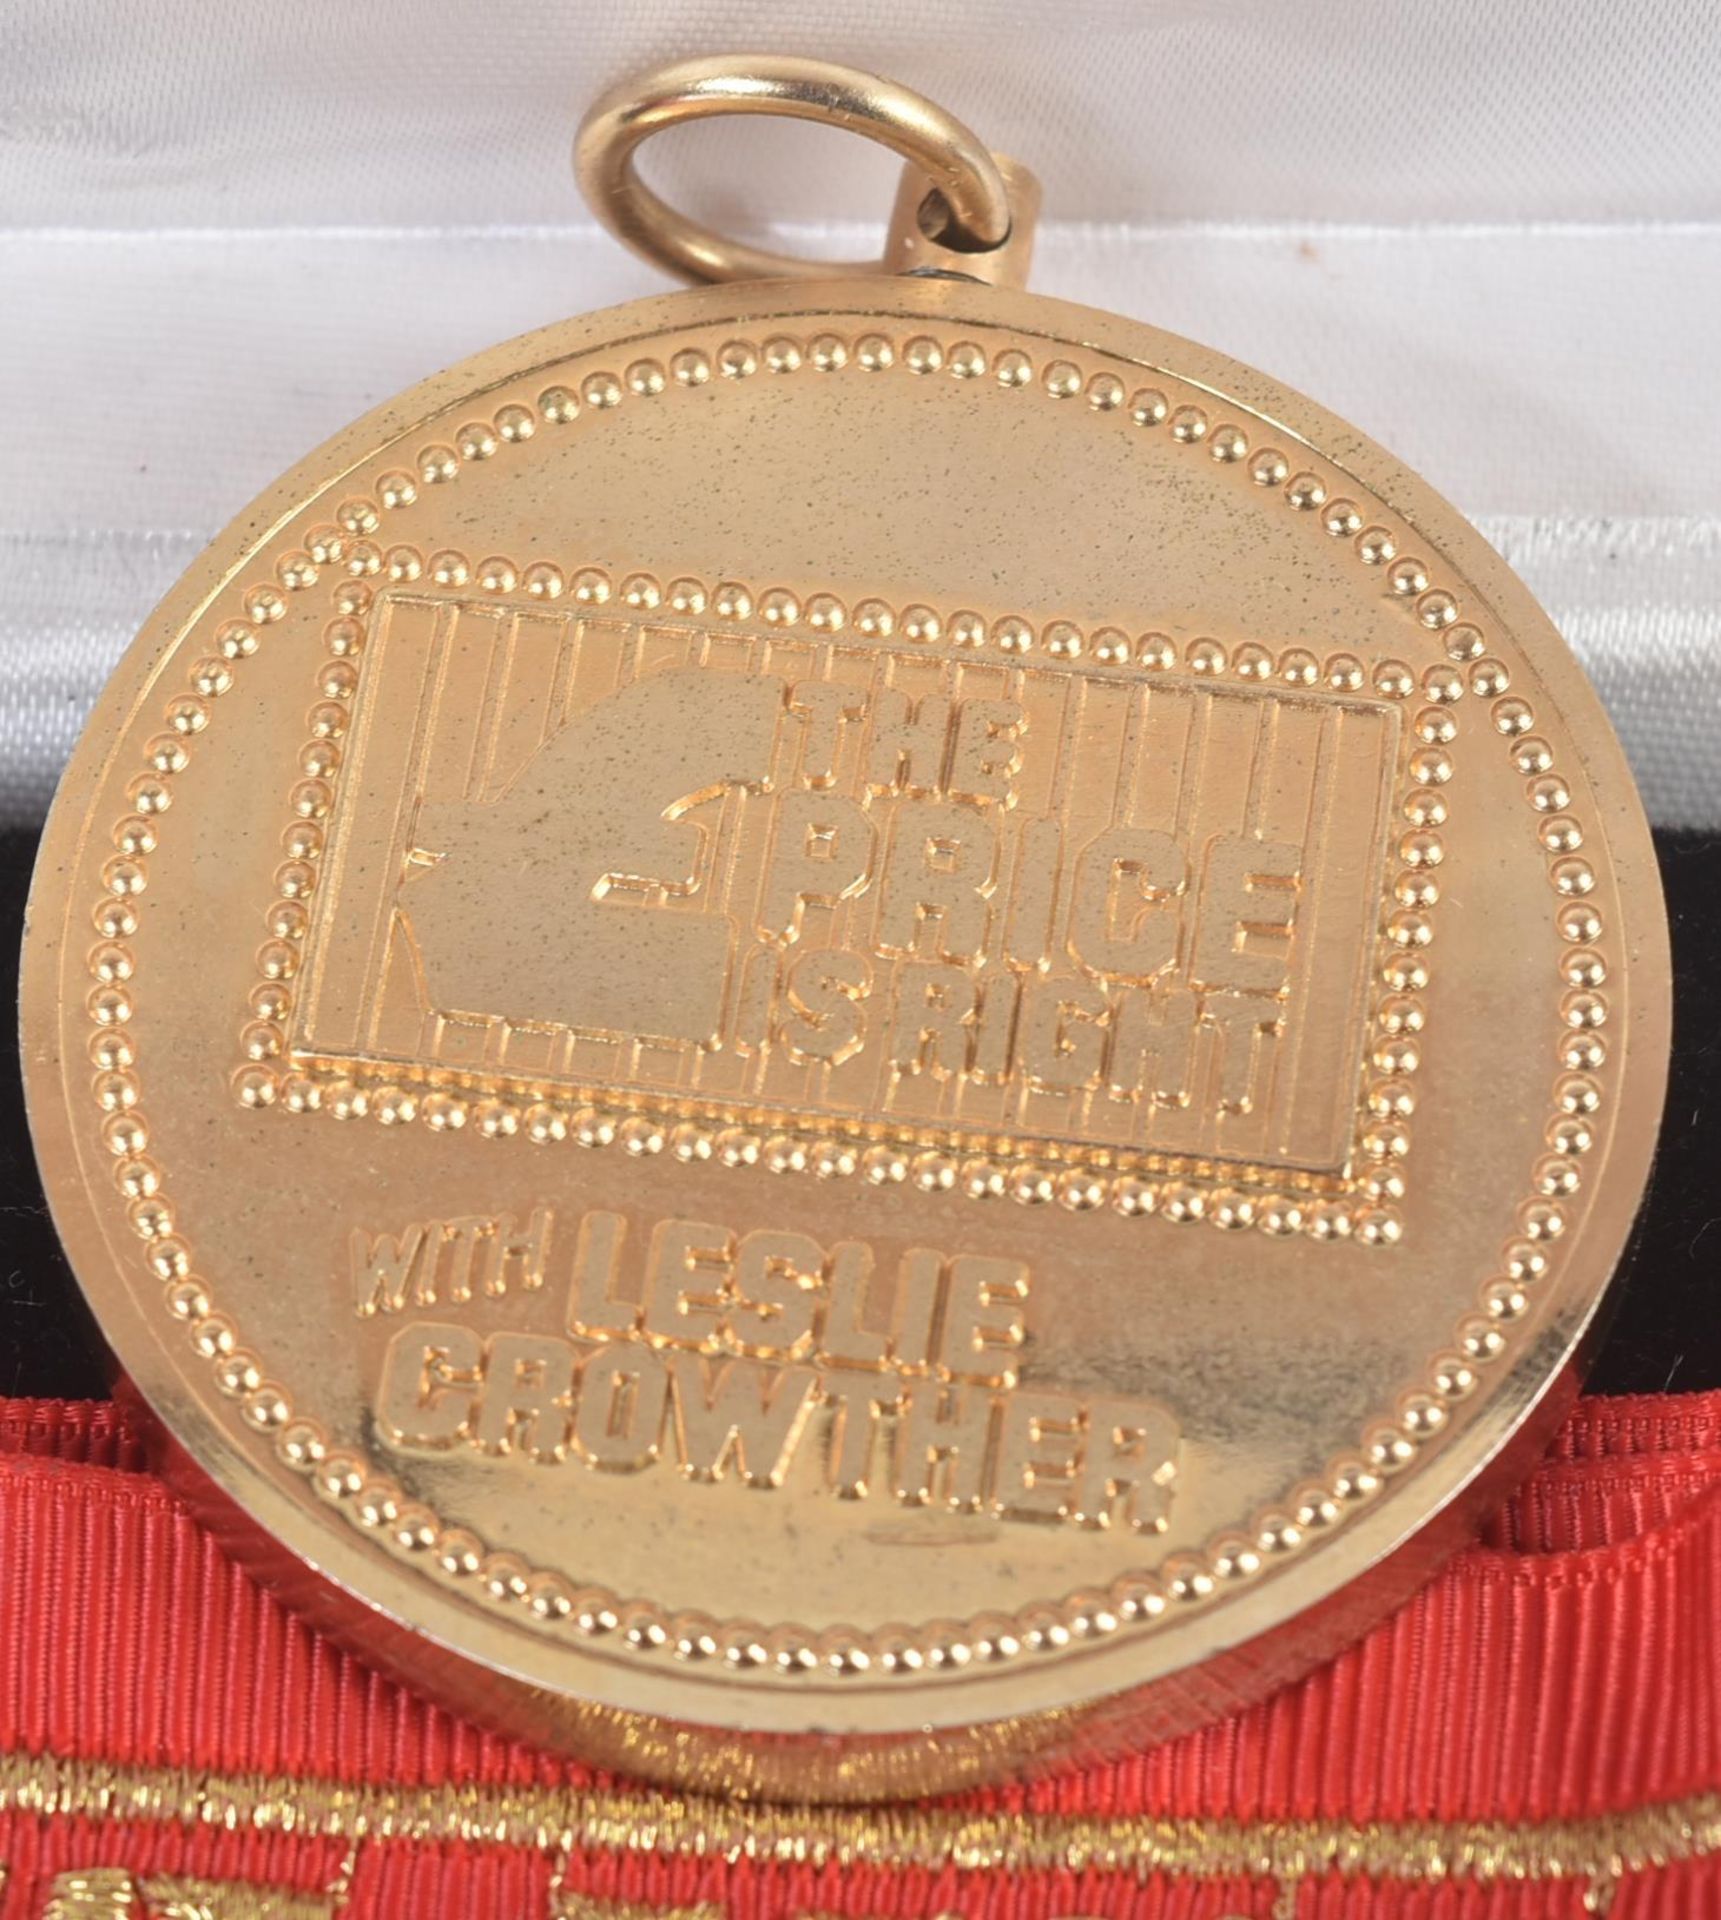 THE PRICE IS RIGHT (1984-1988 GAME SHOW) - ORIGINAL CONTESTANT MEDAL - Image 4 of 6